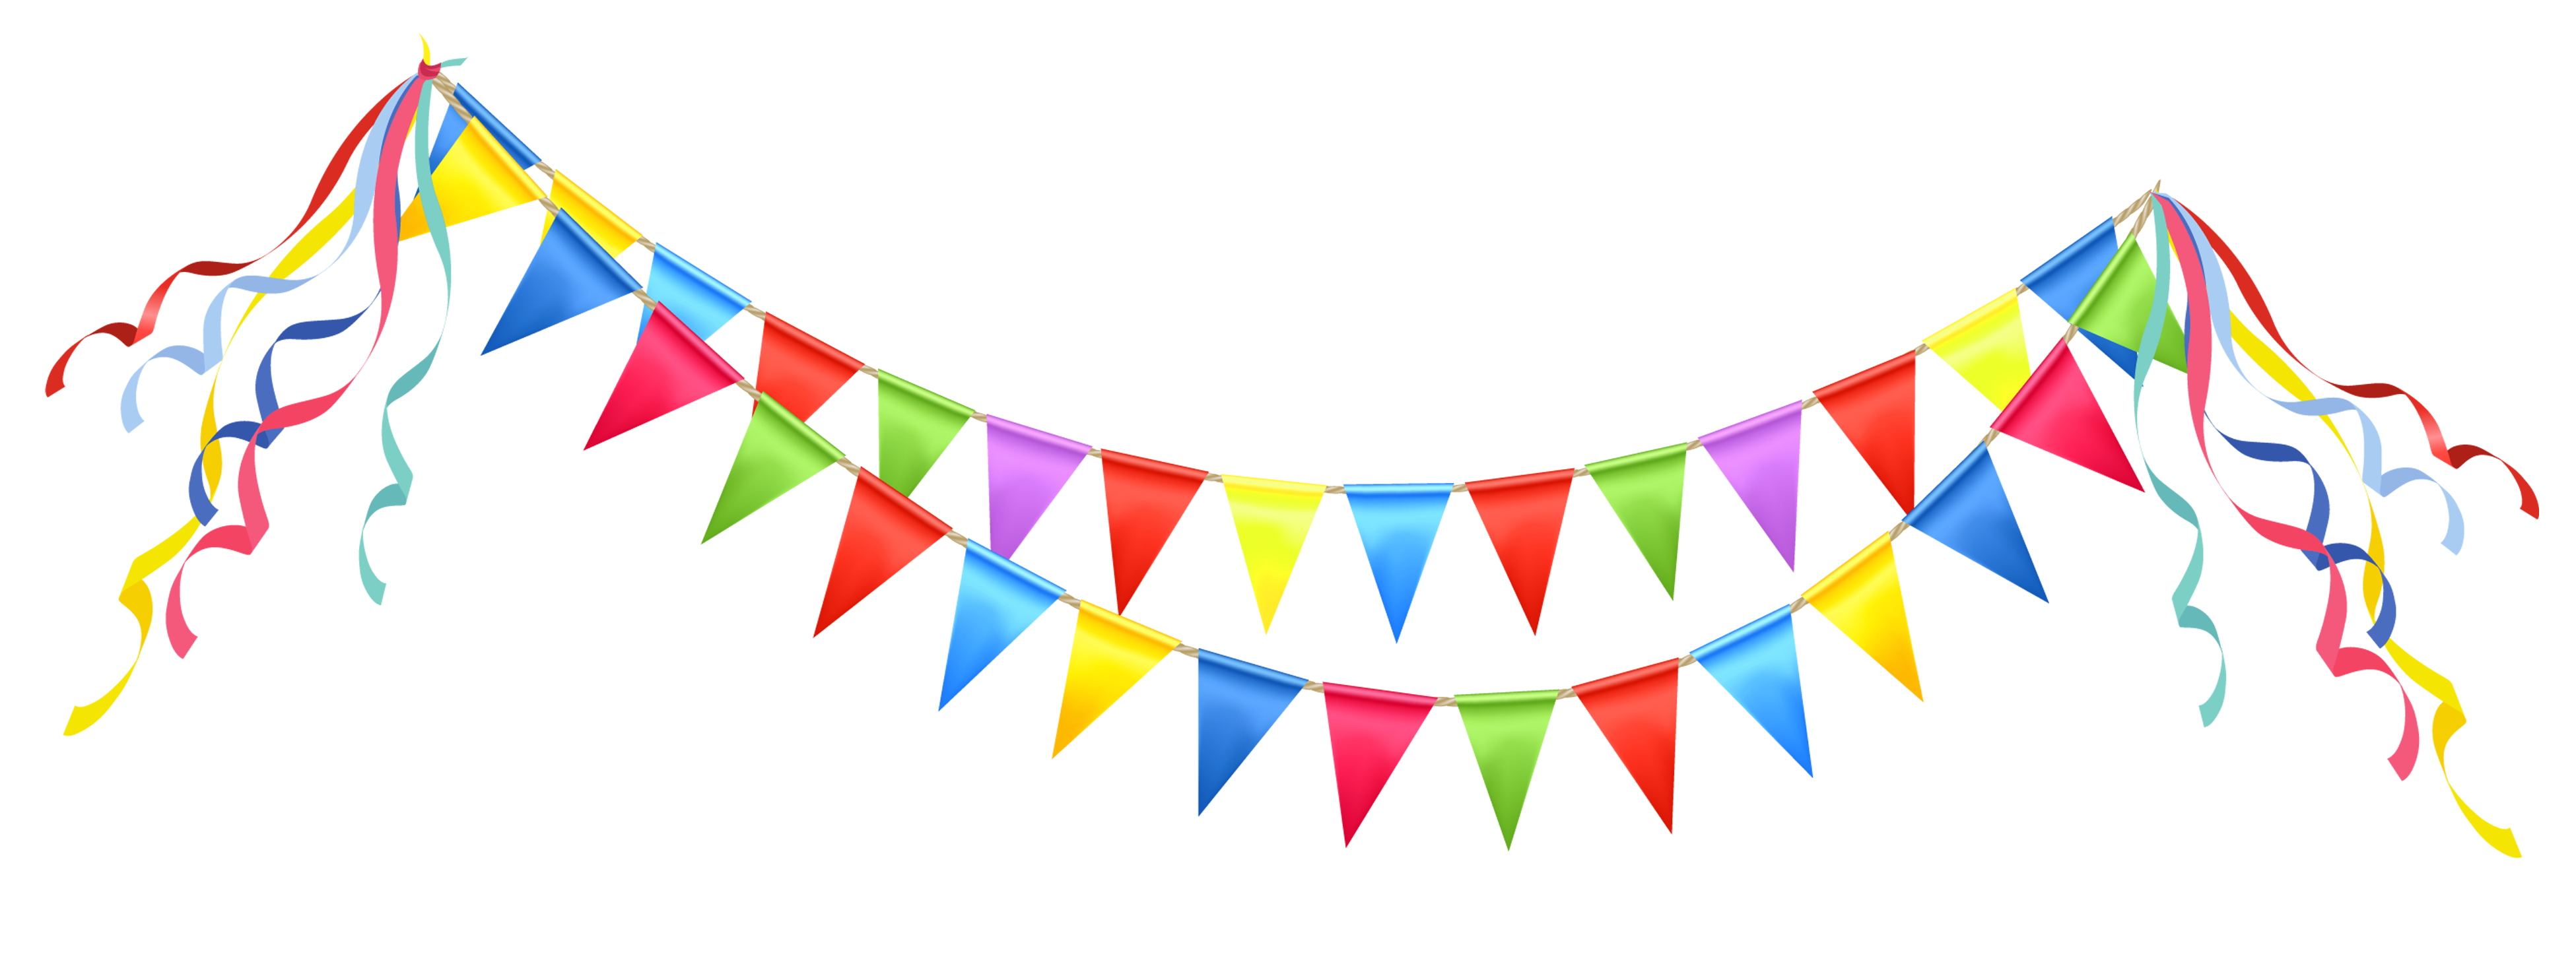 Transparent Party Streamer PNG Clipart Picture